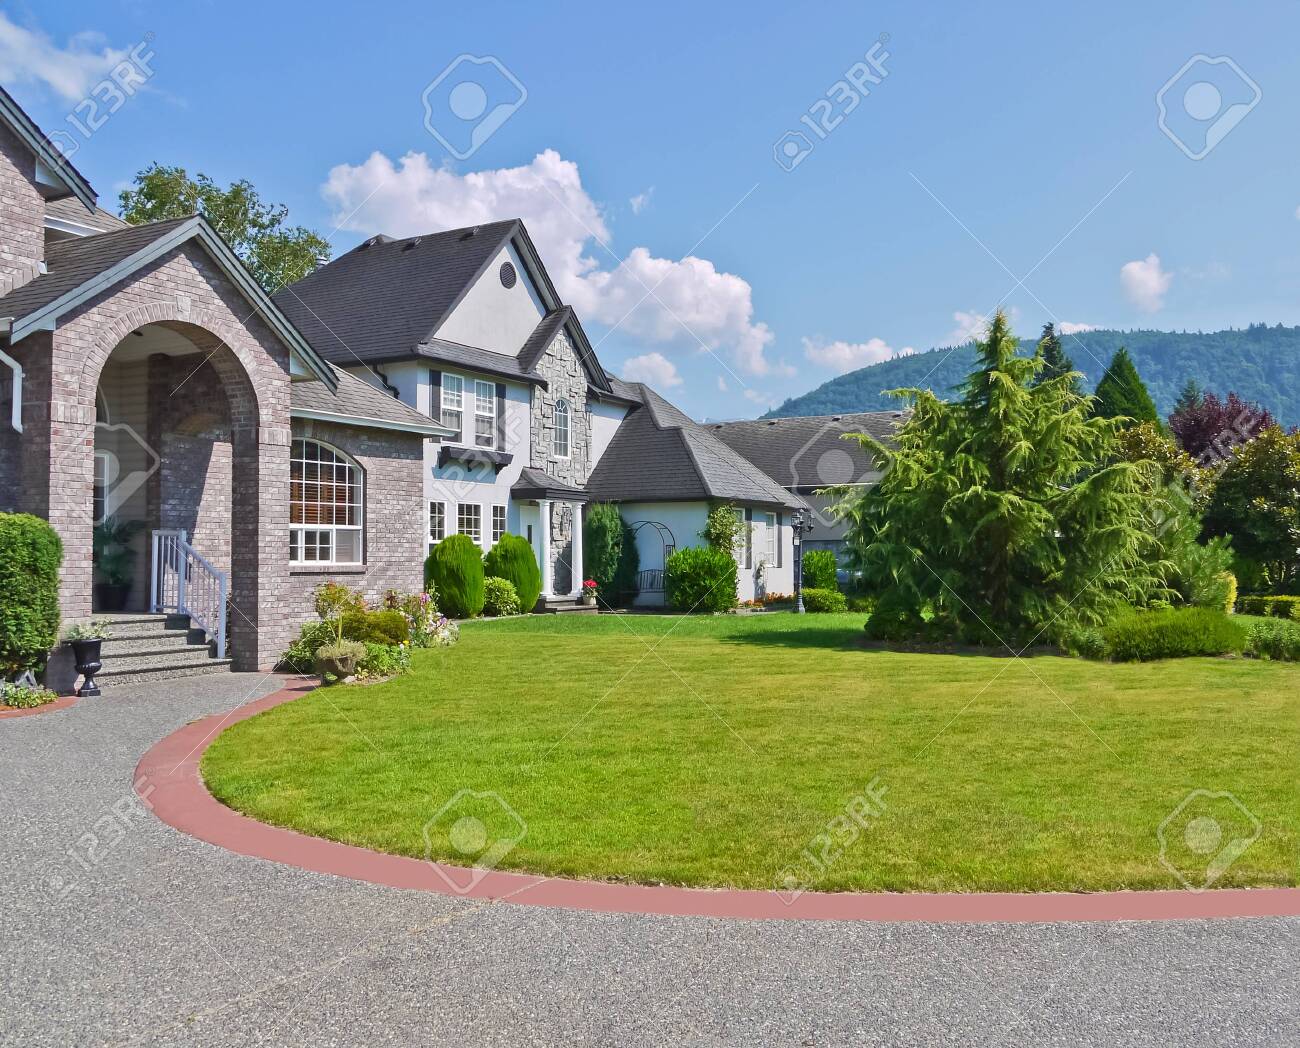 Rounded Driveway And Lawn In Front Of Residential Houses On Blue